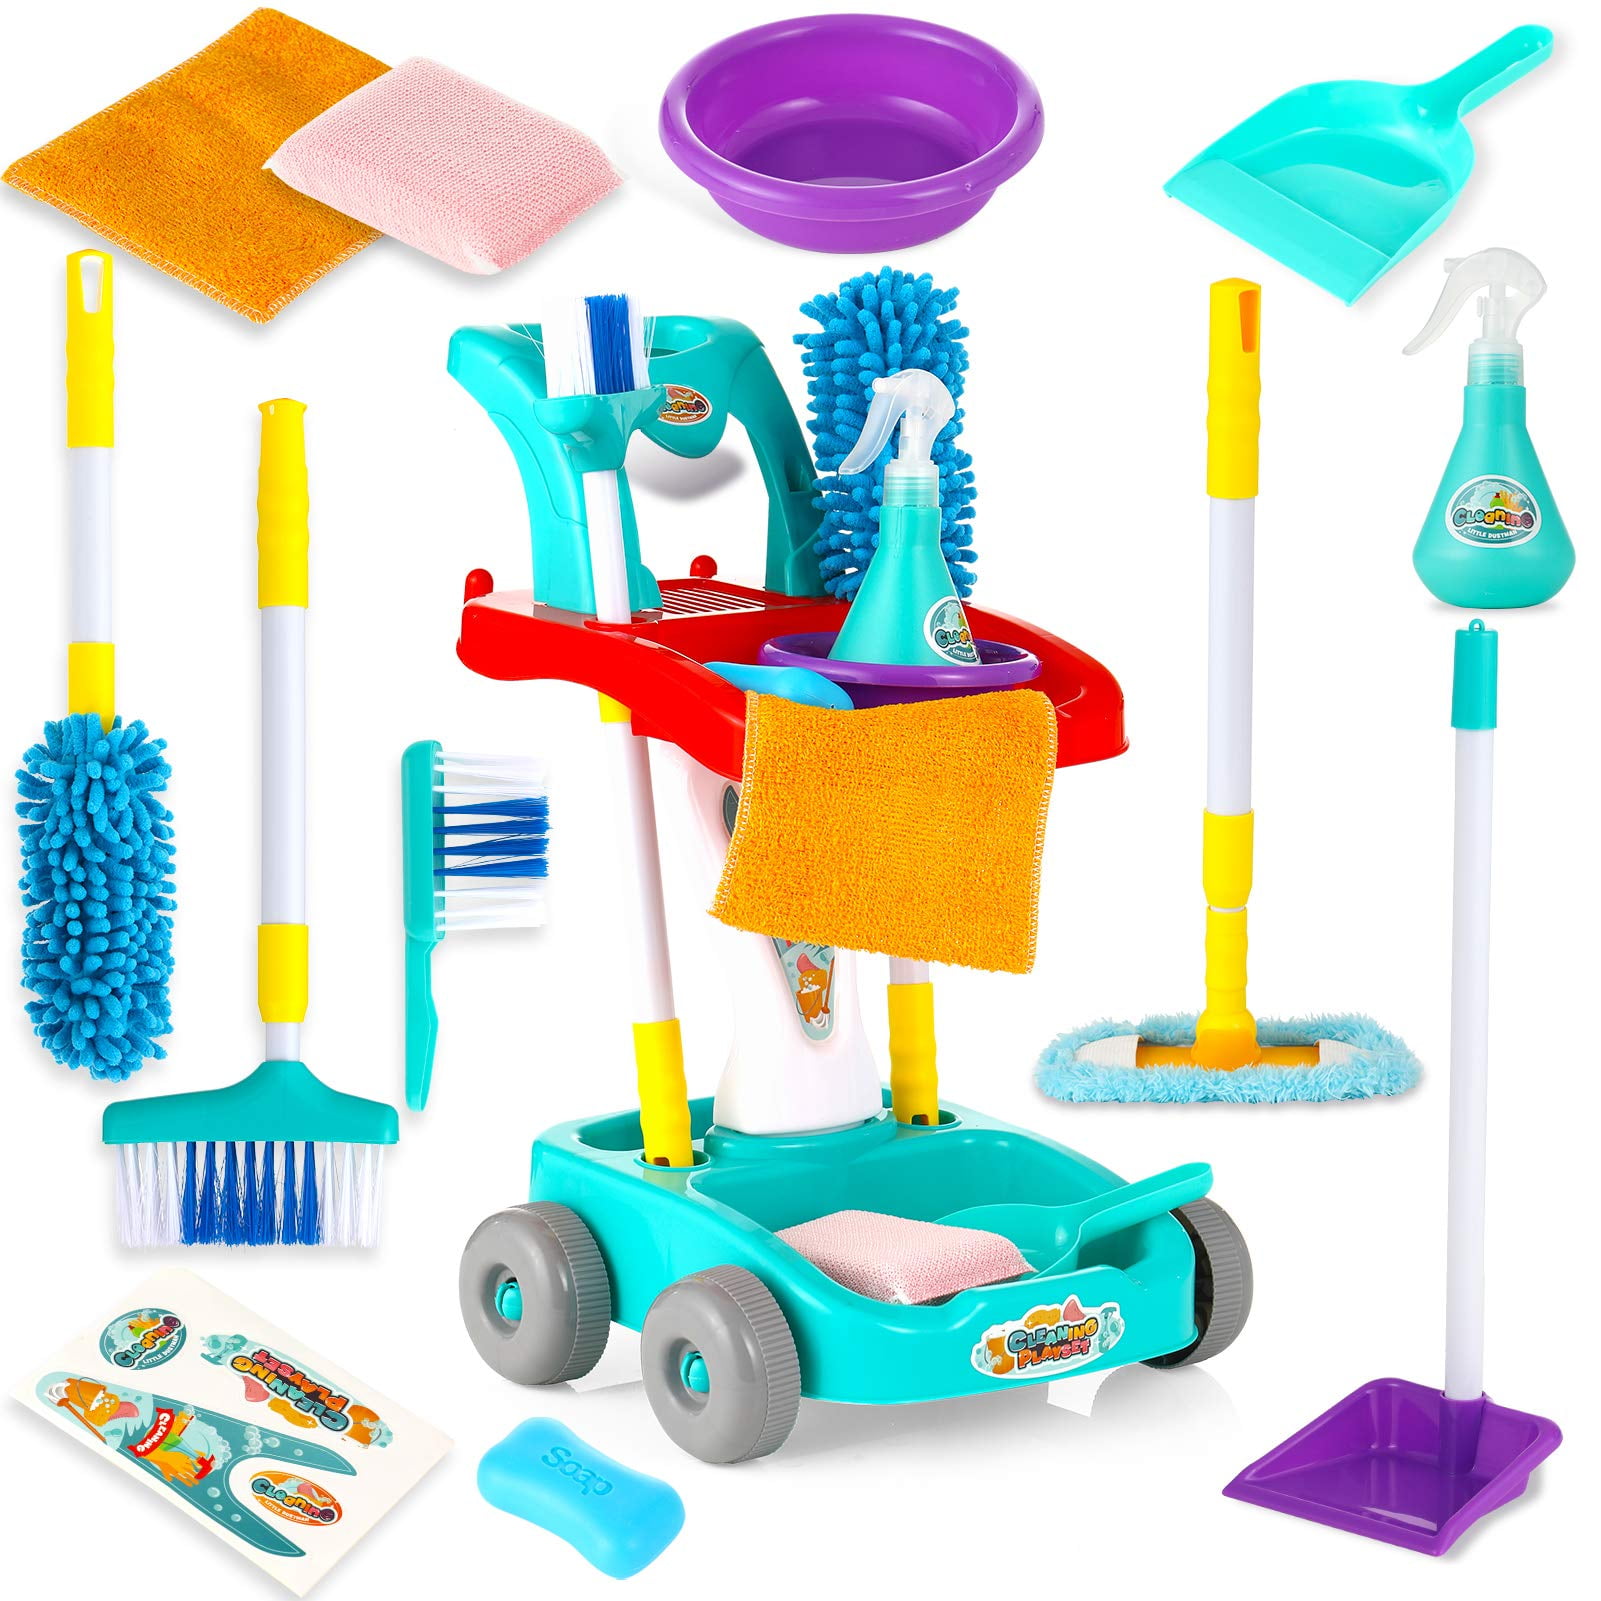 Playkidz Cleaning Caddy Set, 10Pcs Includes Spray, Sponge, Squeegee, Brush,  Organizer Caddy - Play Helper Realistic Housekeeping Set, Recommended for